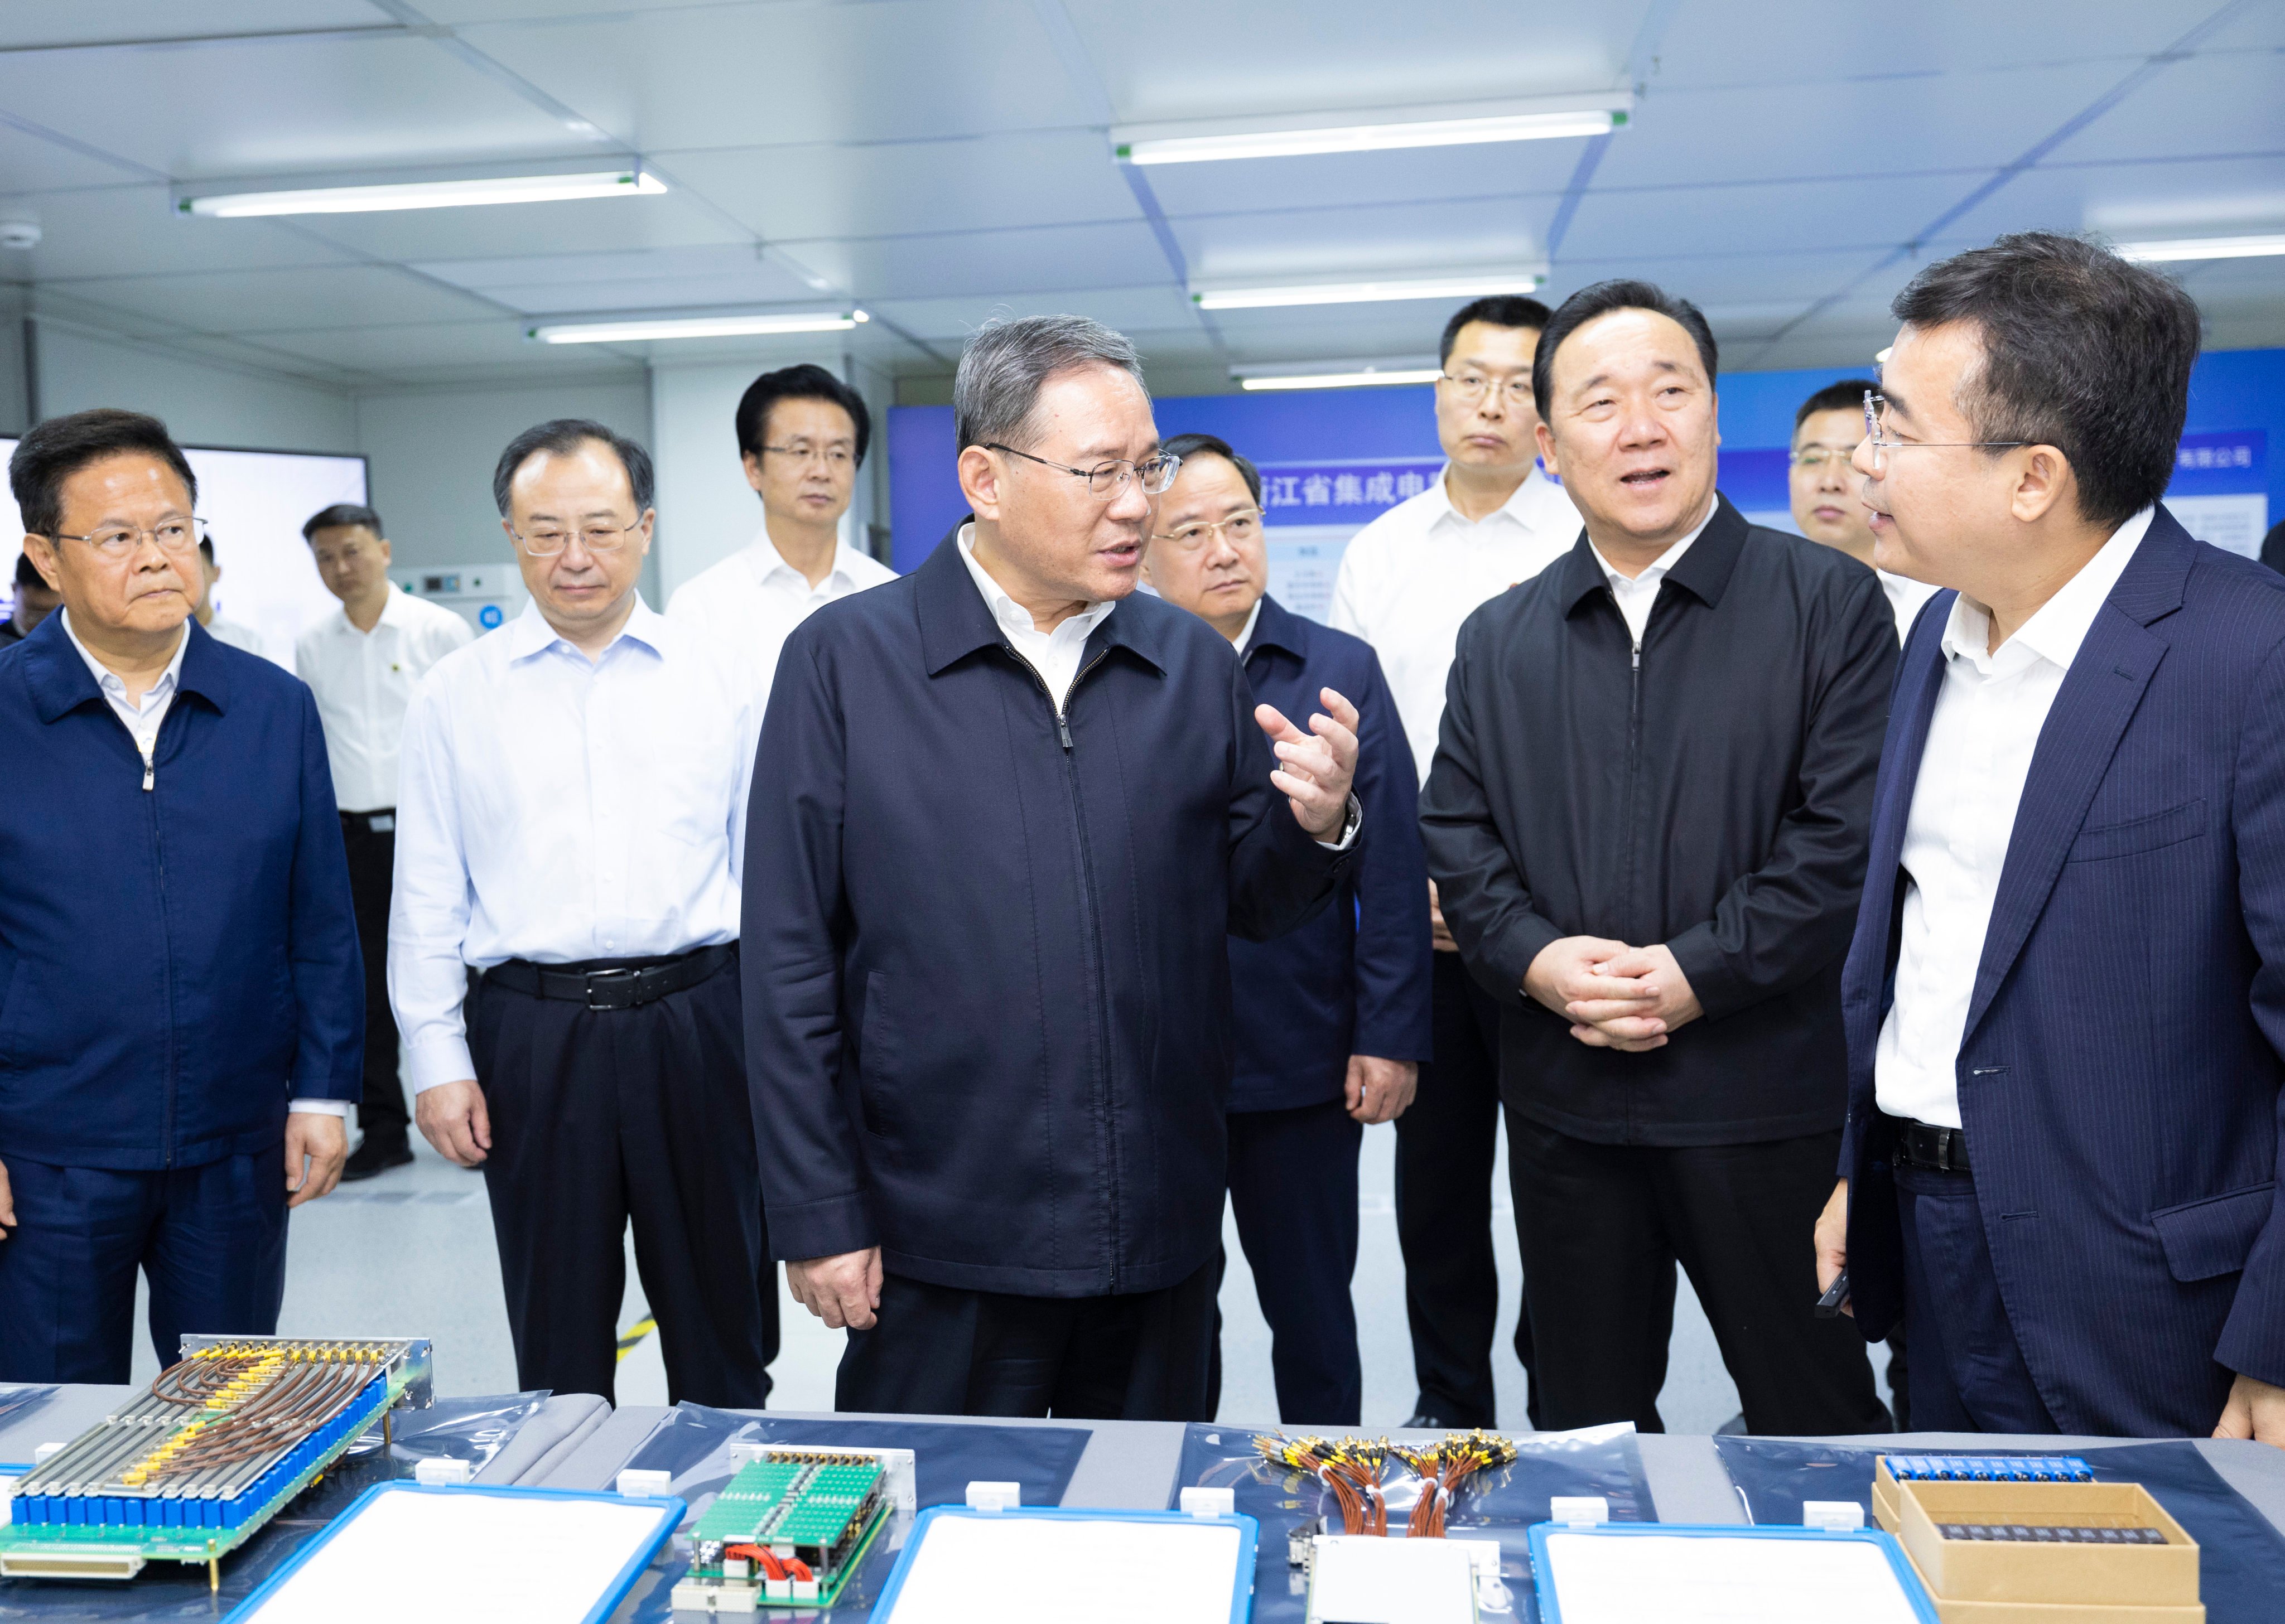 In China’s Zhejiang province on Saturday, Premier Li Qiang called on local officials and business owners to expedite their digital transformations. Photo: Xinhua